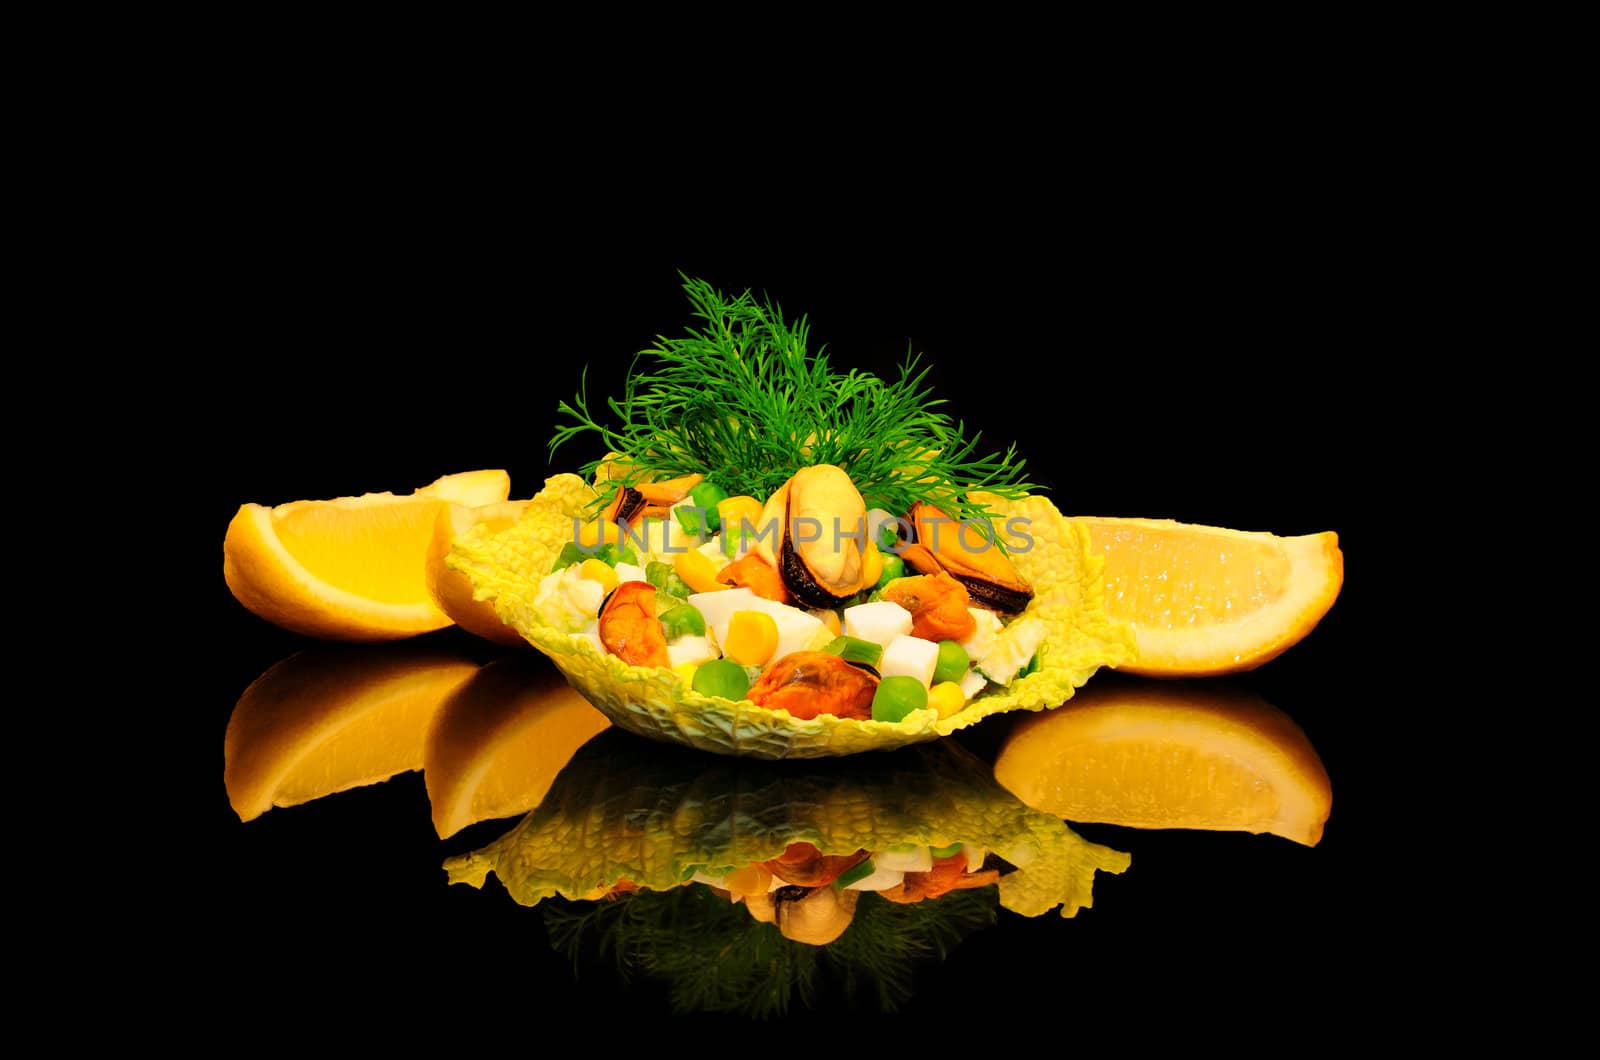 Salad of mussels with corn and peas in the leaves of savoy cabbage on a black background